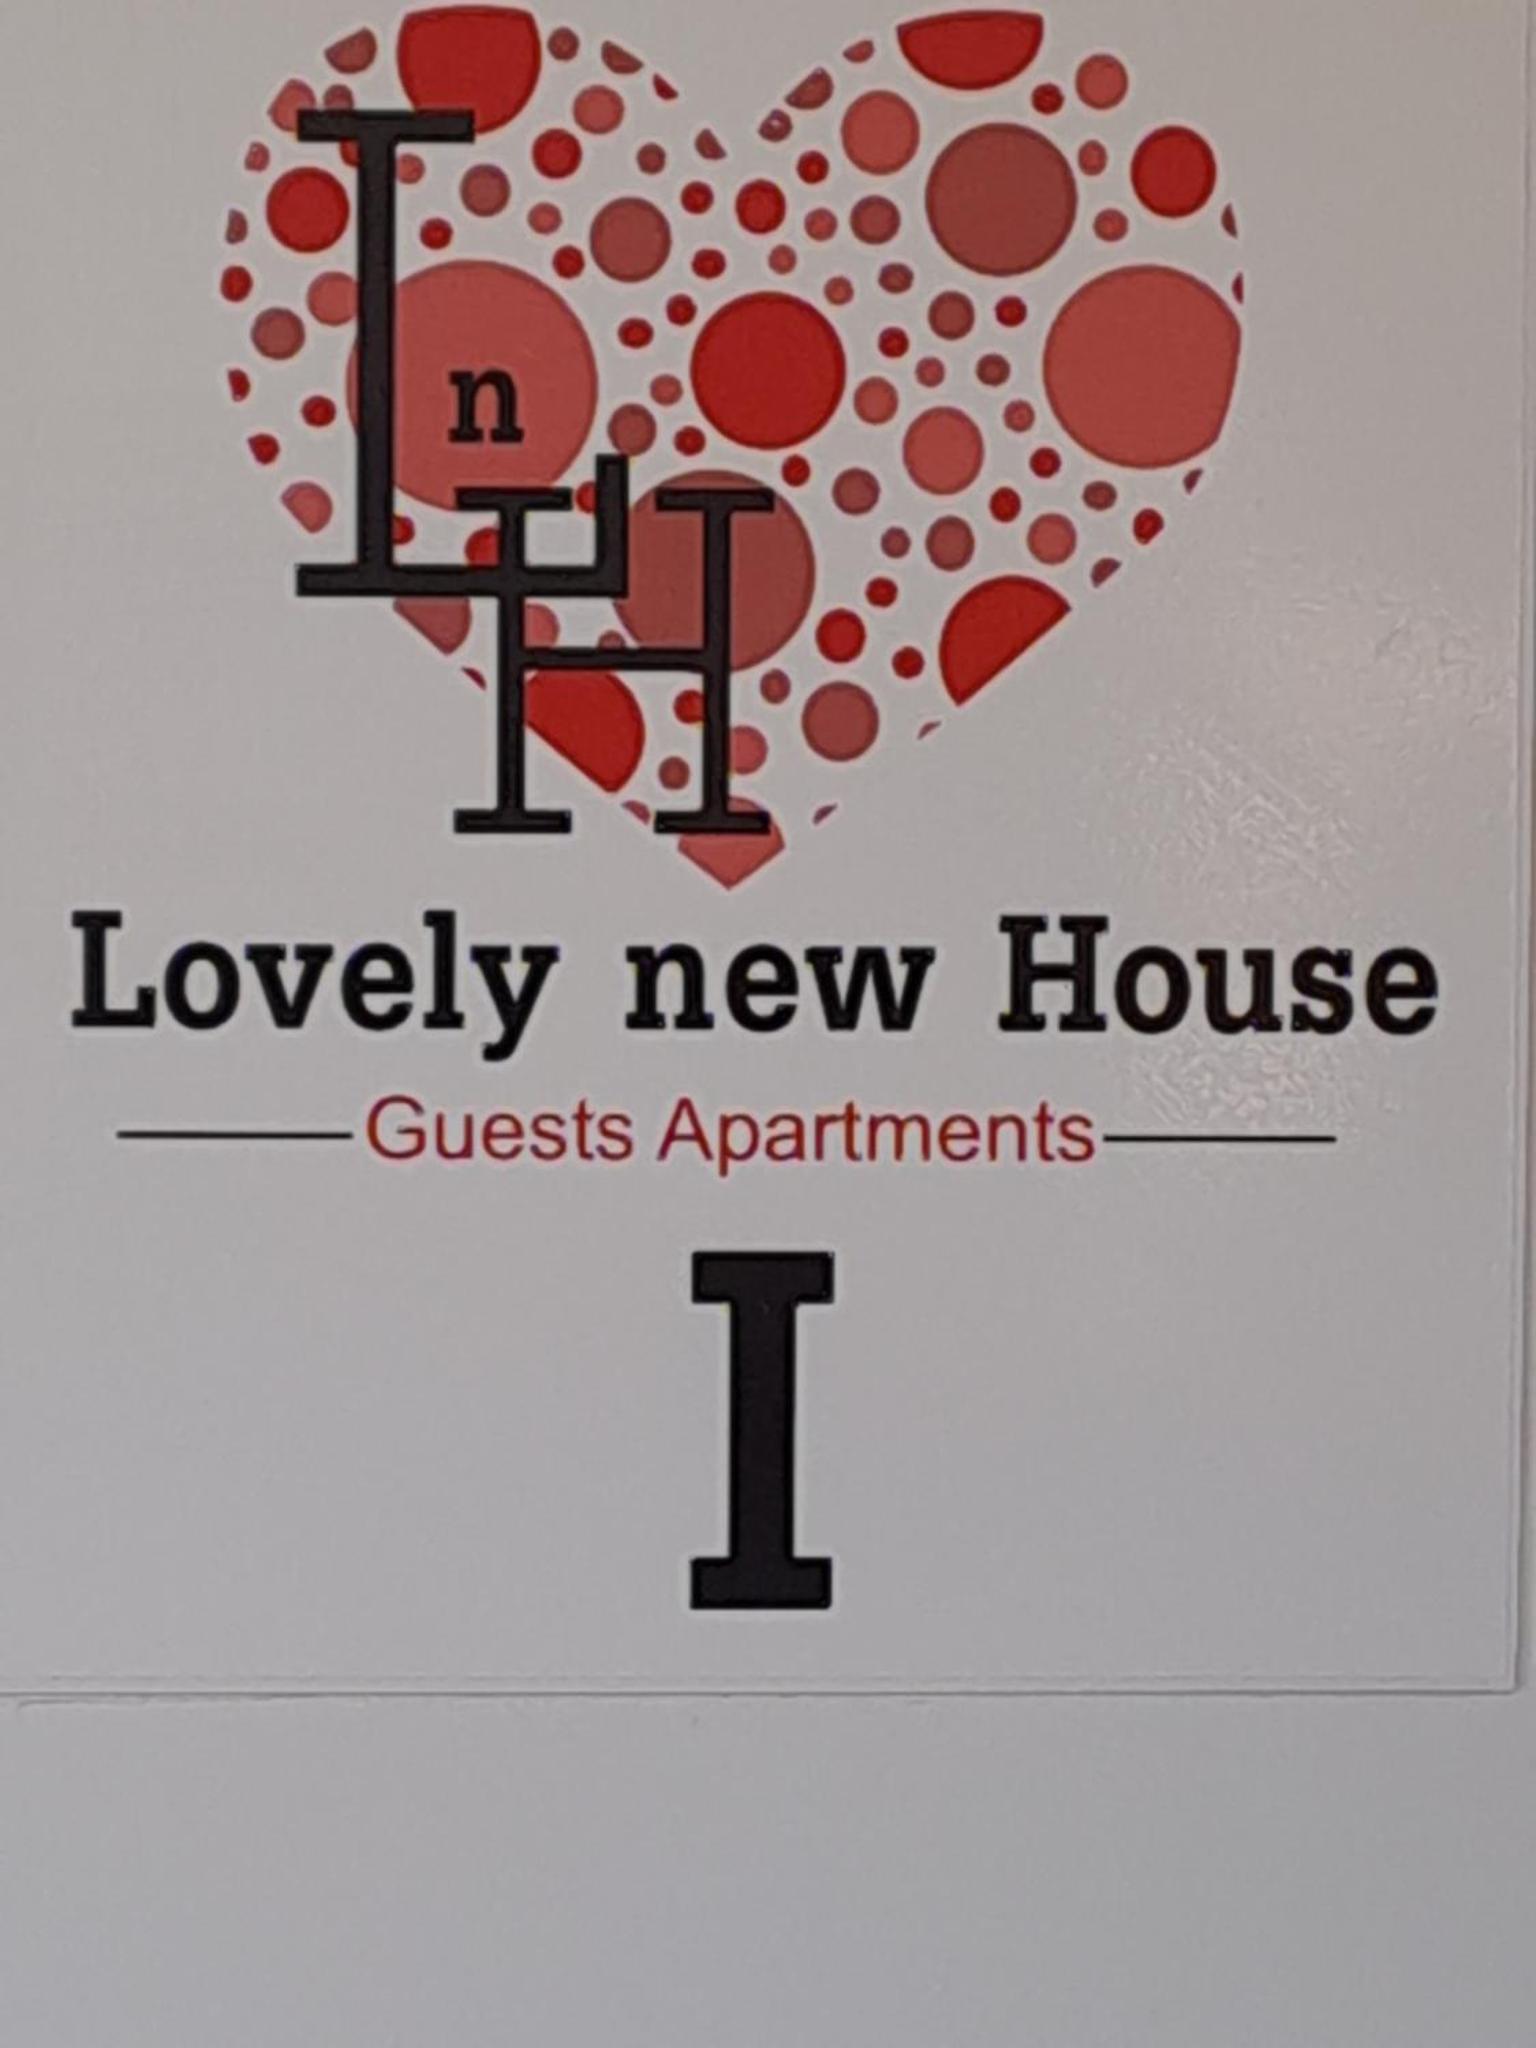 Lovely new House - Guests Apartments